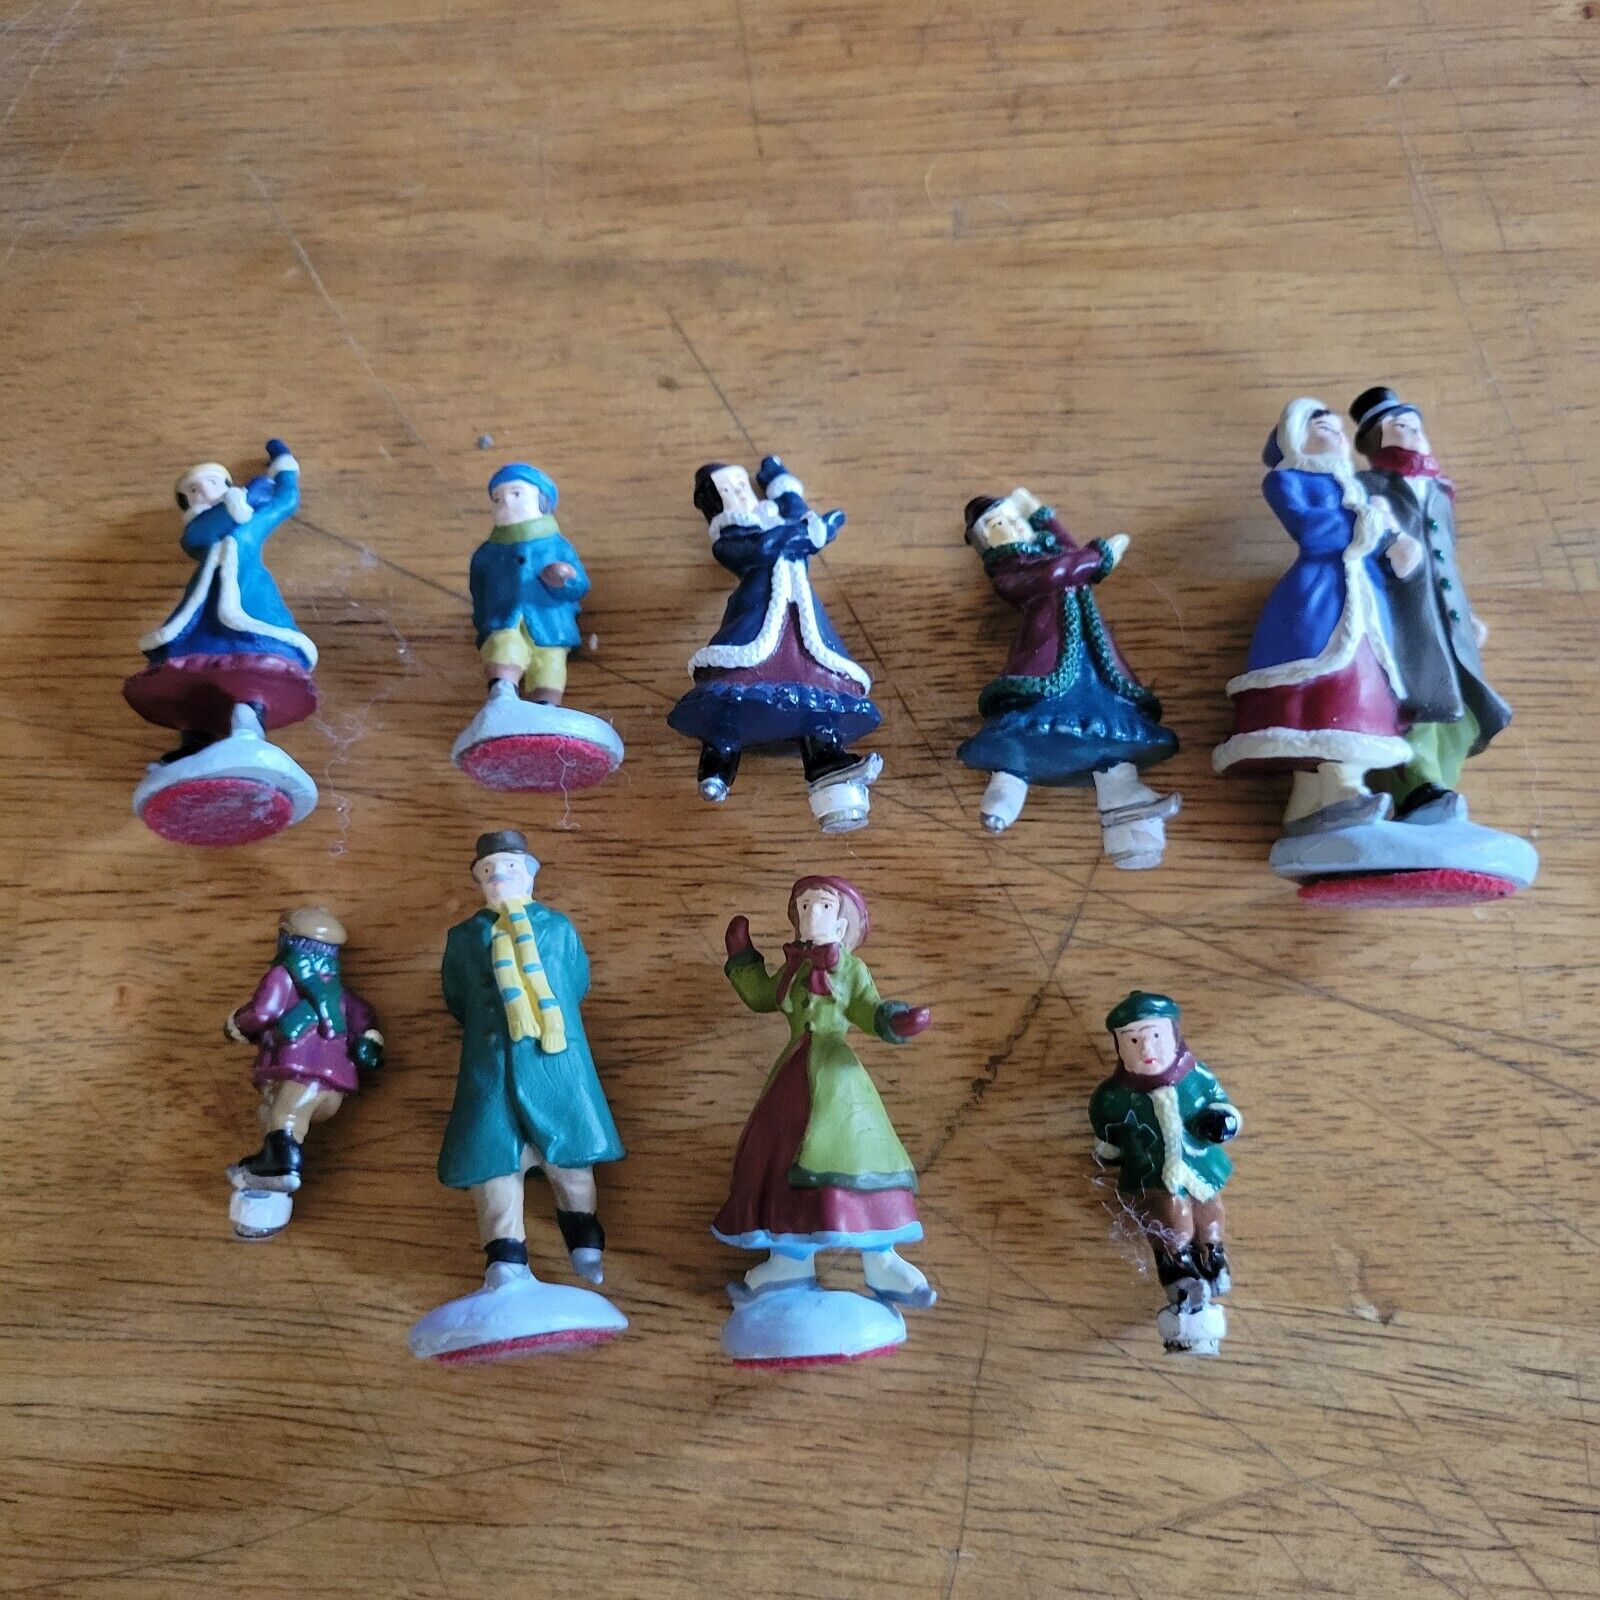 Mr Christmas Holiday Skaters Victorian 10 Ice skaters, Vintage